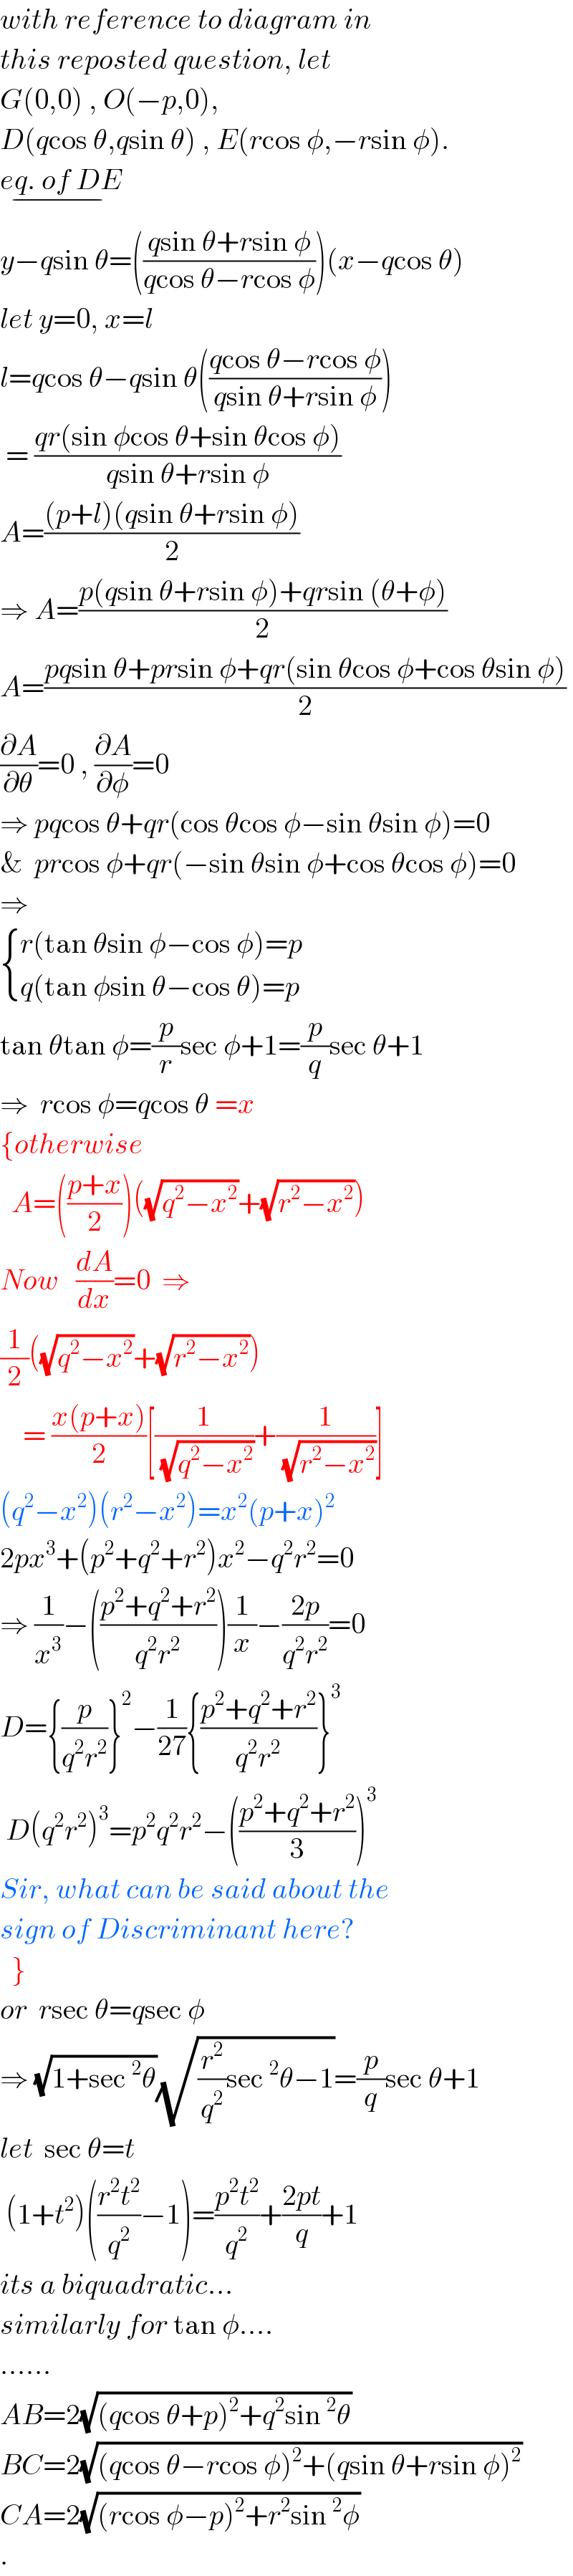 with reference to diagram in  this reposted question, let  G(0,0) , O(−p,0),  D(qcos θ,qsin θ) , E(rcos φ,−rsin φ).  eq. of DE_(−)   y−qsin θ=(((qsin θ+rsin φ)/(qcos θ−rcos φ)))(x−qcos θ)  let y=0, x=l  l=qcos θ−qsin θ(((qcos θ−rcos φ)/(qsin θ+rsin φ)))   = ((qr(sin φcos θ+sin θcos φ))/(qsin θ+rsin φ))  A=(((p+l)(qsin θ+rsin φ))/2)  ⇒ A=((p(qsin θ+rsin φ)+qrsin (θ+φ))/2)  A=((pqsin θ+prsin φ+qr(sin θcos φ+cos θsin φ))/2)  (∂A/∂θ)=0 , (∂A/∂φ)=0  ⇒ pqcos θ+qr(cos θcos φ−sin θsin φ)=0  &  prcos φ+qr(−sin θsin φ+cos θcos φ)=0  ⇒   { ((r(tan θsin φ−cos φ)=p)),((q(tan φsin θ−cos θ)=p)) :}  tan θtan φ=(p/r)sec φ+1=(p/q)sec θ+1  ⇒  rcos φ=qcos θ =x  {otherwise    A=(((p+x)/2))((√(q^2 −x^2 ))+(√(r^2 −x^2 )))  Now   (dA/dx)=0  ⇒  (1/2)((√(q^2 −x^2 ))+(√(r^2 −x^2 )))      = ((x(p+x))/2)[(1/(√(q^2 −x^2 )))+(1/(√(r^2 −x^2 )))]  (q^2 −x^2 )(r^2 −x^2 )=x^2 (p+x)^2   2px^3 +(p^2 +q^2 +r^2 )x^2 −q^2 r^2 =0  ⇒ (1/x^3 )−(((p^2 +q^2 +r^2 )/(q^2 r^2 )))(1/x)−((2p)/(q^2 r^2 ))=0  D={(p/(q^2 r^2 ))}^2 −(1/(27)){((p^2 +q^2 +r^2 )/(q^2 r^2 ))}^3    D(q^2 r^2 )^3 =p^2 q^2 r^2 −(((p^2 +q^2 +r^2 )/3))^3   Sir, what can be said about the  sign of Discriminant here?    }  or  rsec θ=qsec φ  ⇒ (√(1+sec^2 θ))(√((r^2 /q^2 )sec^2 θ−1))=(p/q)sec θ+1  let  sec θ=t   (1+t^2 )(((r^2 t^2 )/q^2 )−1)=((p^2 t^2 )/q^2 )+((2pt)/q)+1  its a biquadratic...  similarly for tan φ....  ......  AB=2(√((qcos θ+p)^2 +q^2 sin^2 θ))  BC=2(√((qcos θ−rcos φ)^2 +(qsin θ+rsin φ)^2 ))  CA=2(√((rcos φ−p)^2 +r^2 sin^2 φ))  .  